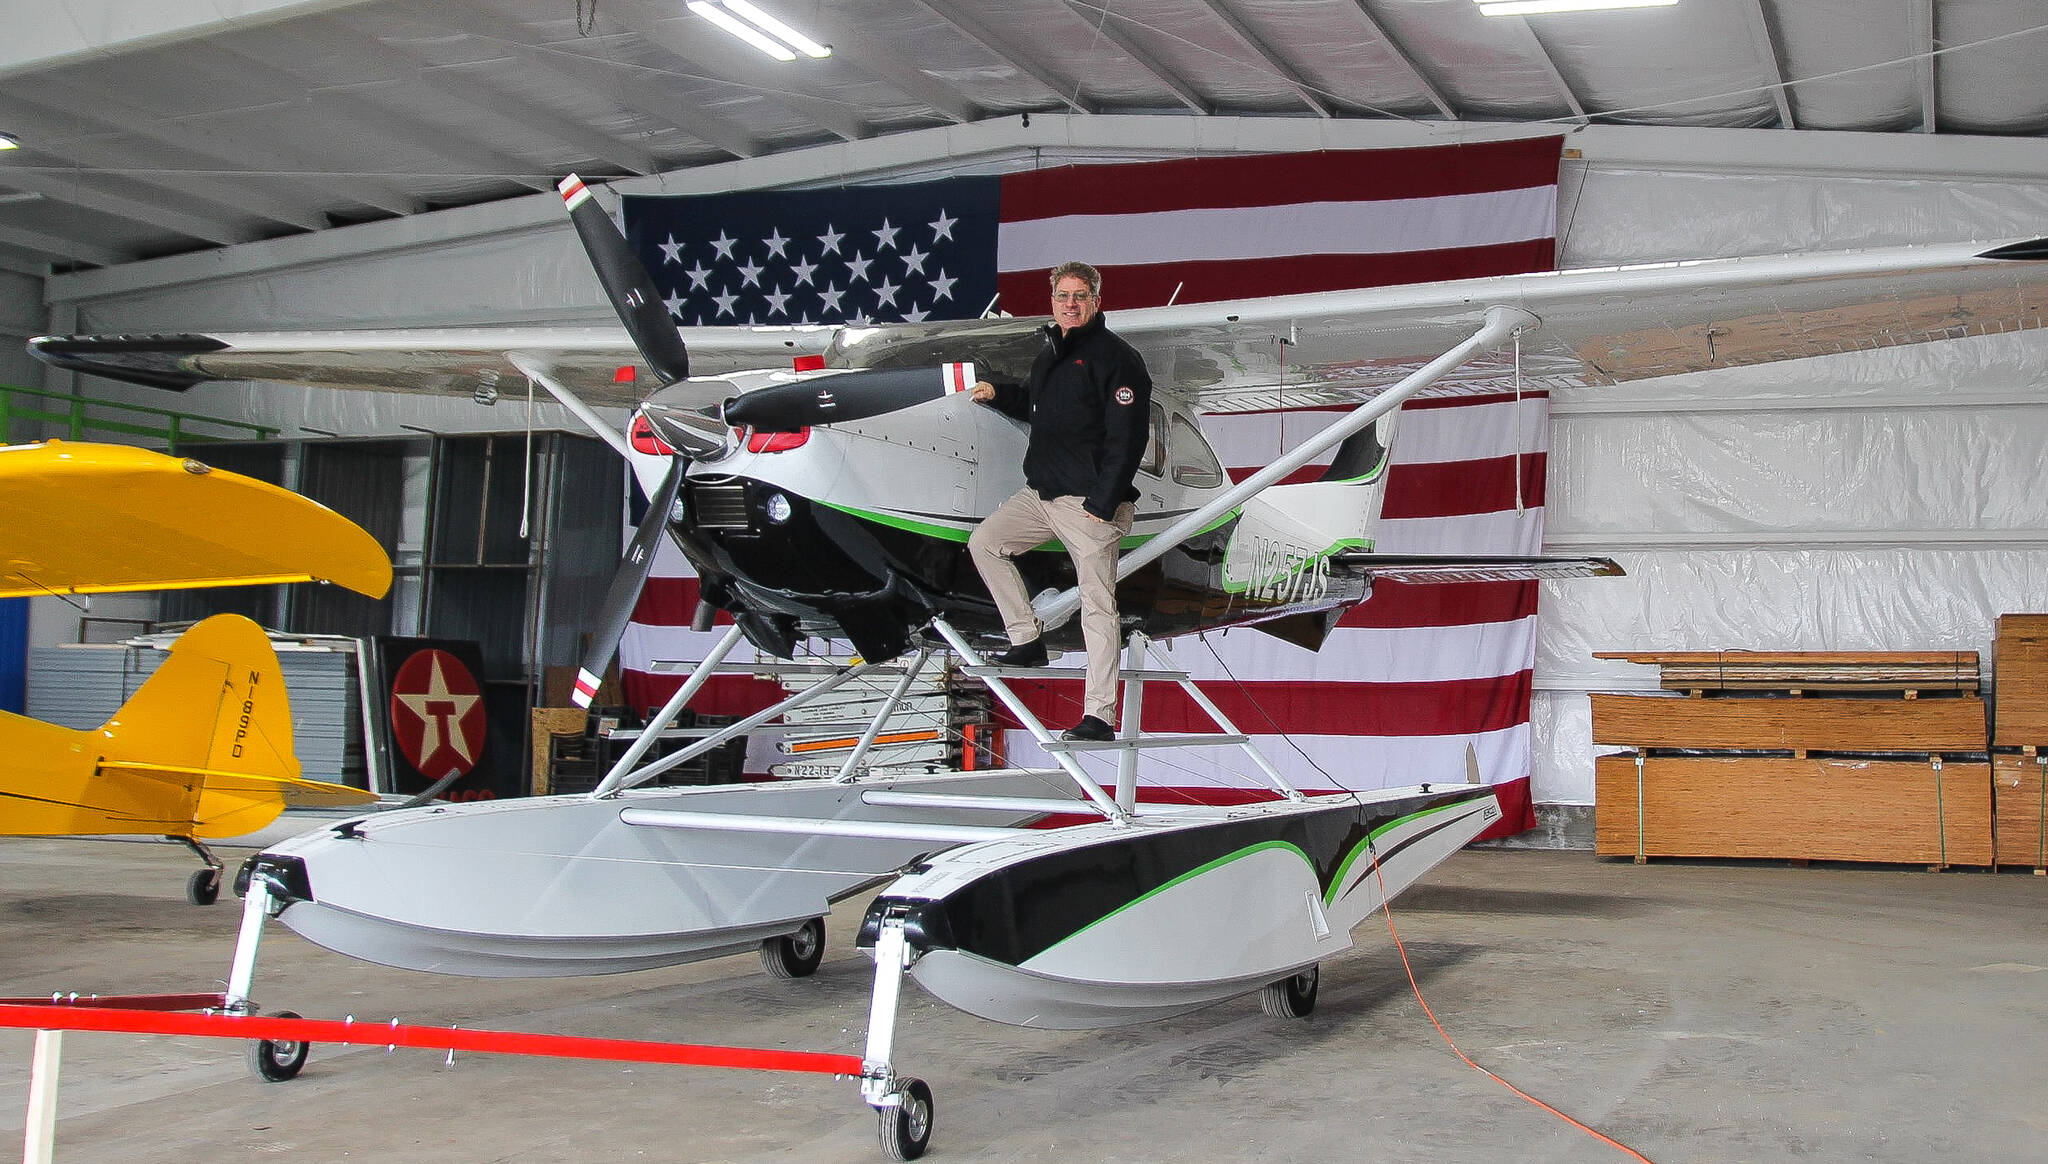 Photo by Luisa Loi
Robert DeLaurentis poses next to his Cessna 182 on aerocet amphibious floats, which is parked inside of the airport’s main hangar. DeLaurentis also hung a 20-by-30-foot American flag on the wall of the building, which will become an air and car museum and potentially a convention center for community events.